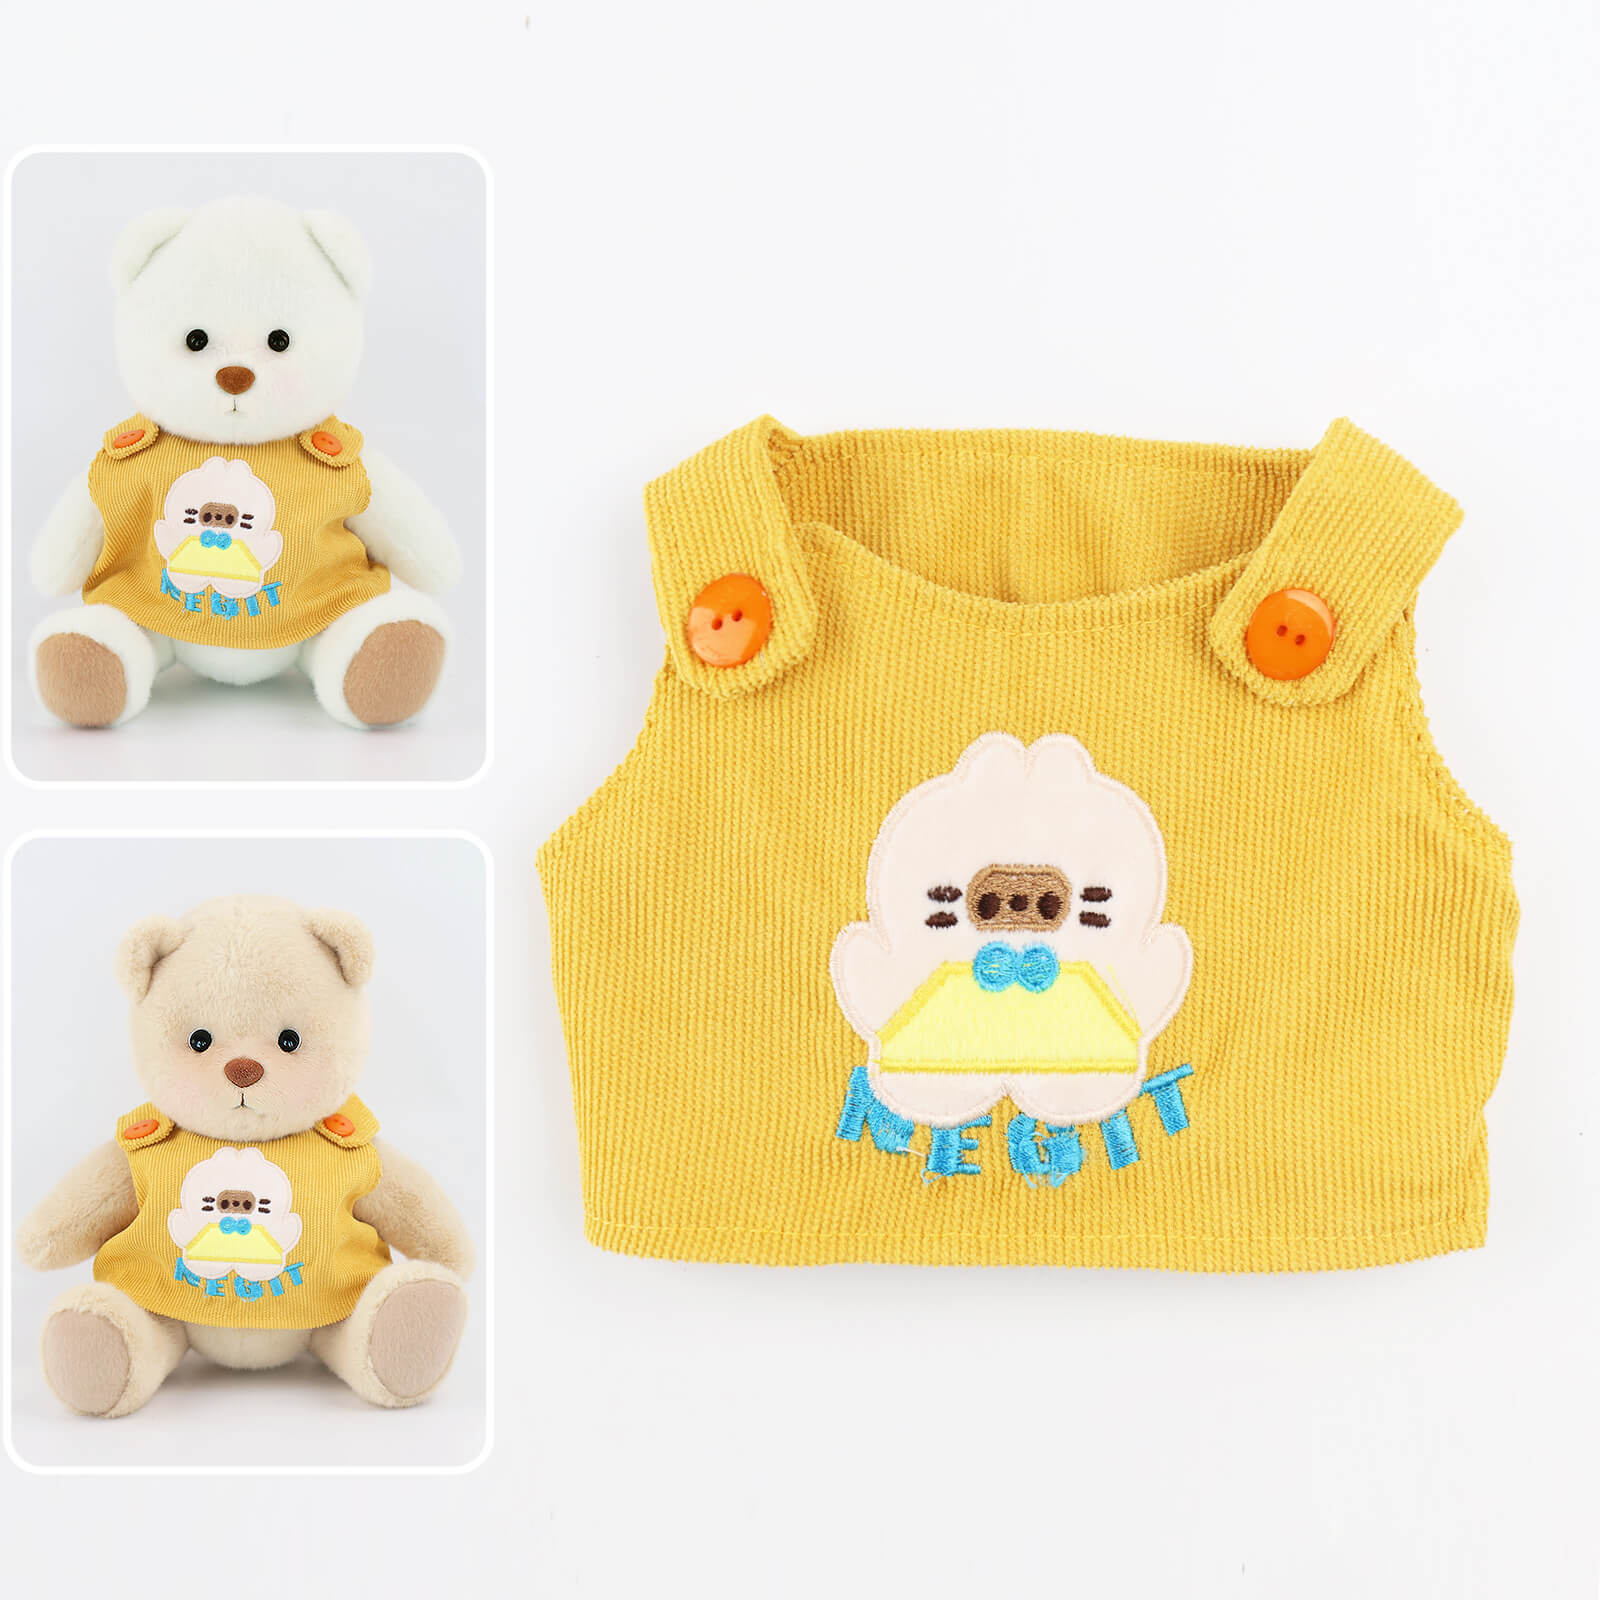 Beddingset.vip-Bedding Bear Outfits-Orange Corduroy Vest(Outfit Only) | Teddy Bear Clothes-Orange 